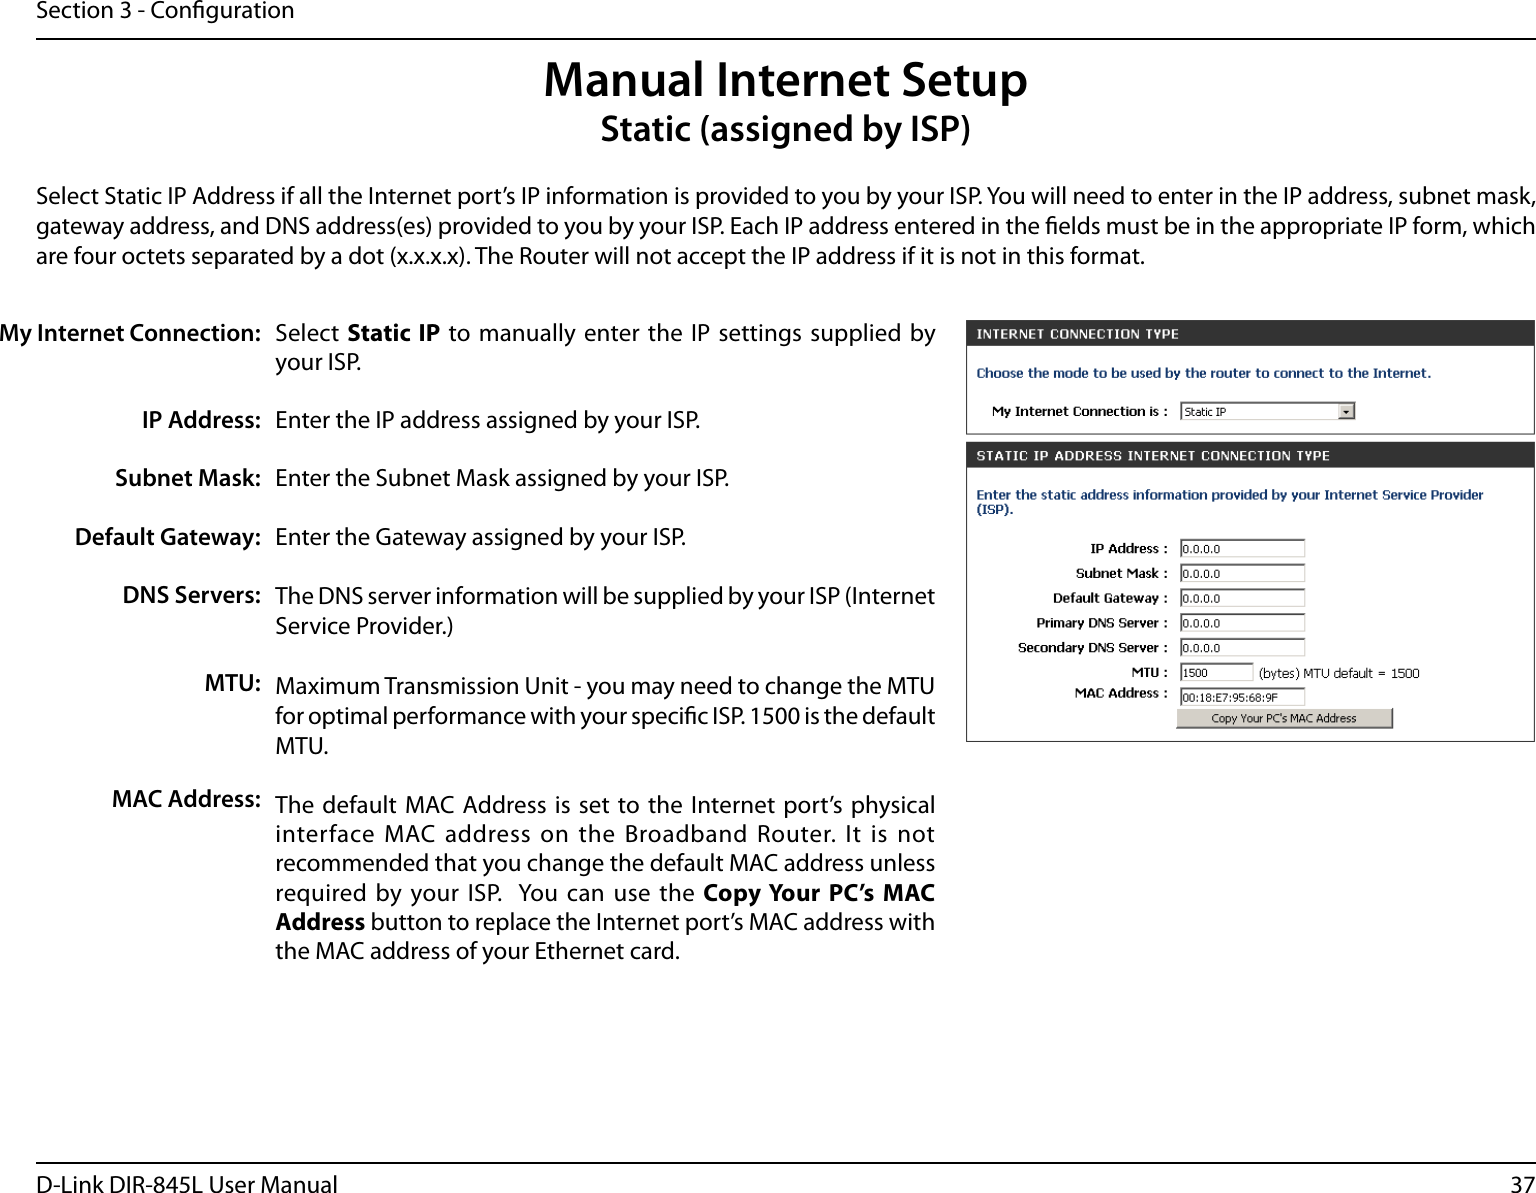 37D-Link DIR-845L User ManualSection 3 - CongurationSelect  Static IP to manually  enter the  IP settings supplied  by your ISP.Enter the IP address assigned by your ISP.Enter the Subnet Mask assigned by your ISP.Enter the Gateway assigned by your ISP.The DNS server information will be supplied by your ISP (Internet Service Provider.)Maximum Transmission Unit - you may need to change the MTU for optimal performance with your specic ISP. 1500 is the default MTU.The default MAC Address is set to the Internet port’s physical interface  MAC address on the  Broadband Router. It  is not recommended that you change the default MAC address unless required by your ISP.  You can use  the Copy Your  PC’s  MAC Address button to replace the Internet port’s MAC address with the MAC address of your Ethernet card.My Internet Connection:IP Address:Subnet Mask:Default Gateway:DNS Servers:MTU:MAC Address:Manual Internet SetupStatic (assigned by ISP)Select Static IP Address if all the Internet port’s IP information is provided to you by your ISP. You will need to enter in the IP address, subnet mask, gateway address, and DNS address(es) provided to you by your ISP. Each IP address entered in the elds must be in the appropriate IP form, which are four octets separated by a dot (x.x.x.x). The Router will not accept the IP address if it is not in this format.